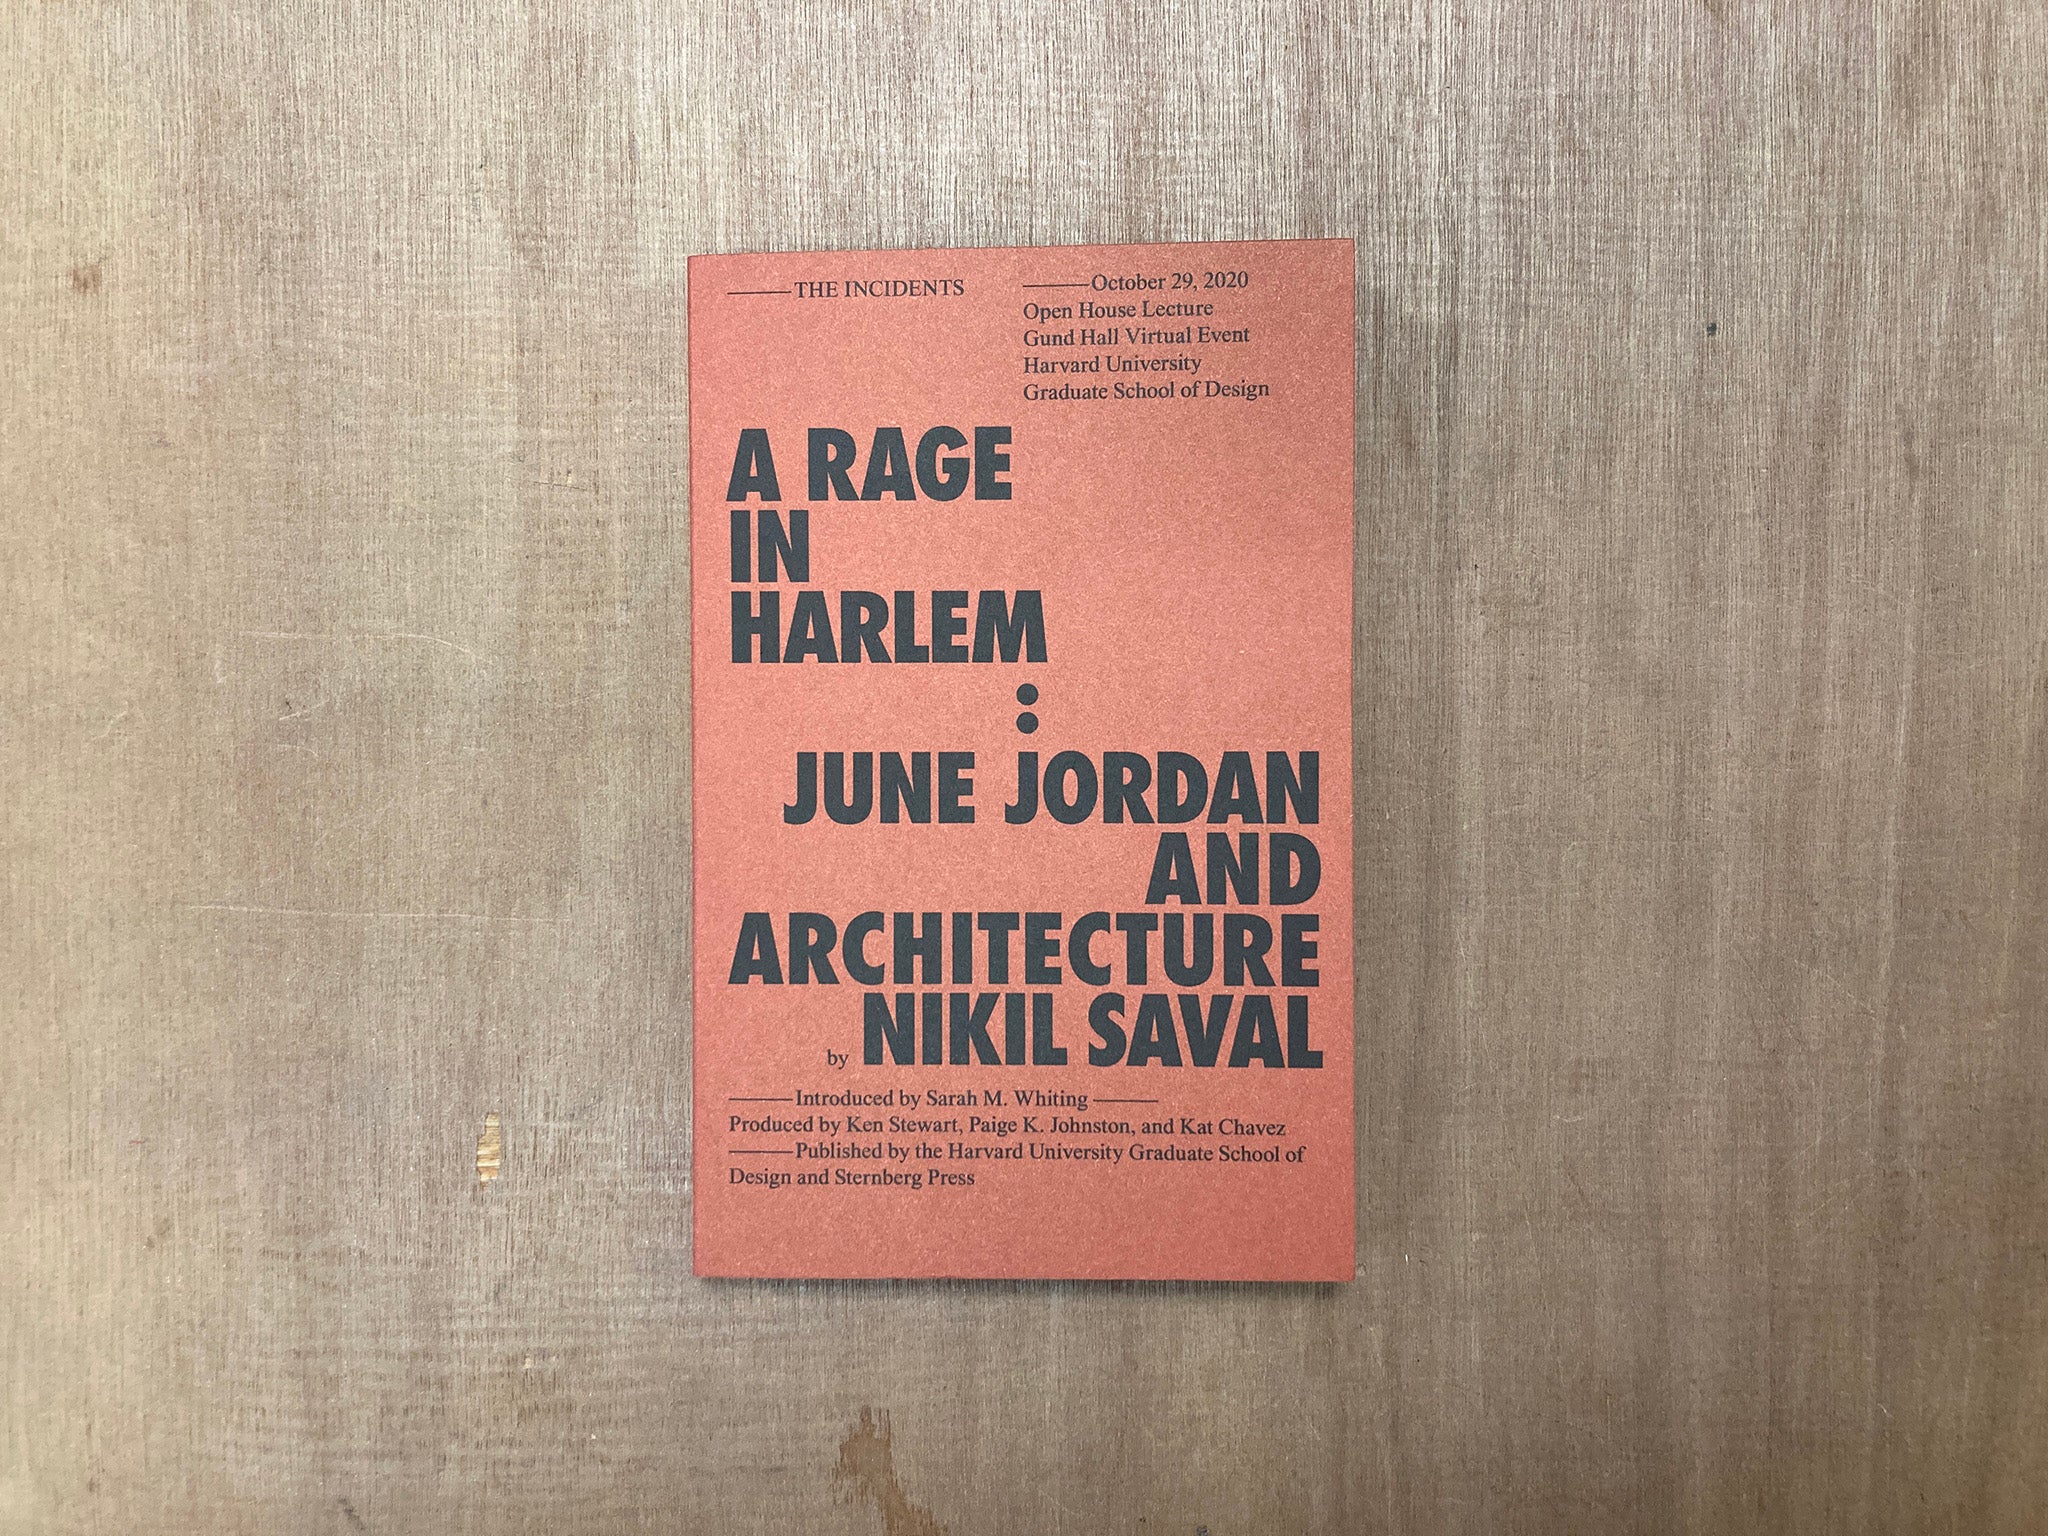 A RAGE IN HARLEM: JUNE JORDAN AND ARCHITECTURE by Nikil Saval